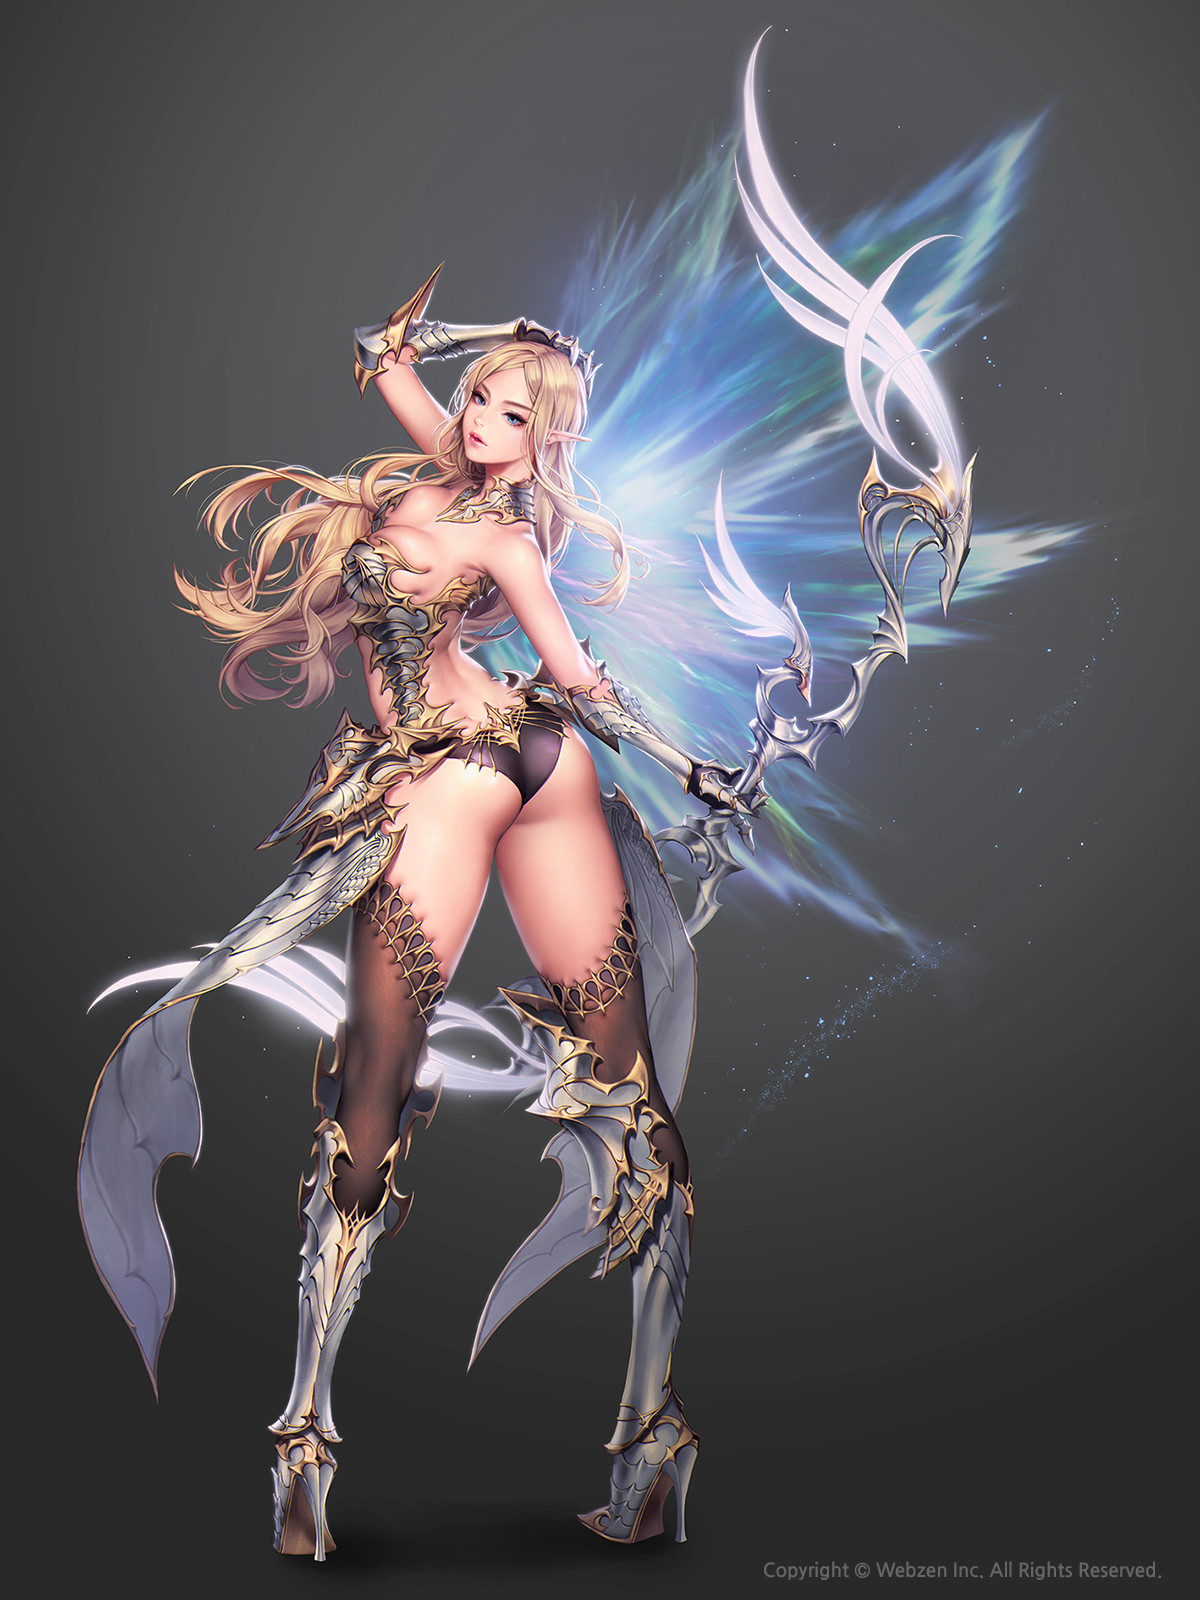 General 1200x1600 Lovecacao drawing women elves blonde long hair wind blue eyes armor gloves skimpy clothes thigh-highs ass high heels magic wings weapon bow archer sparks